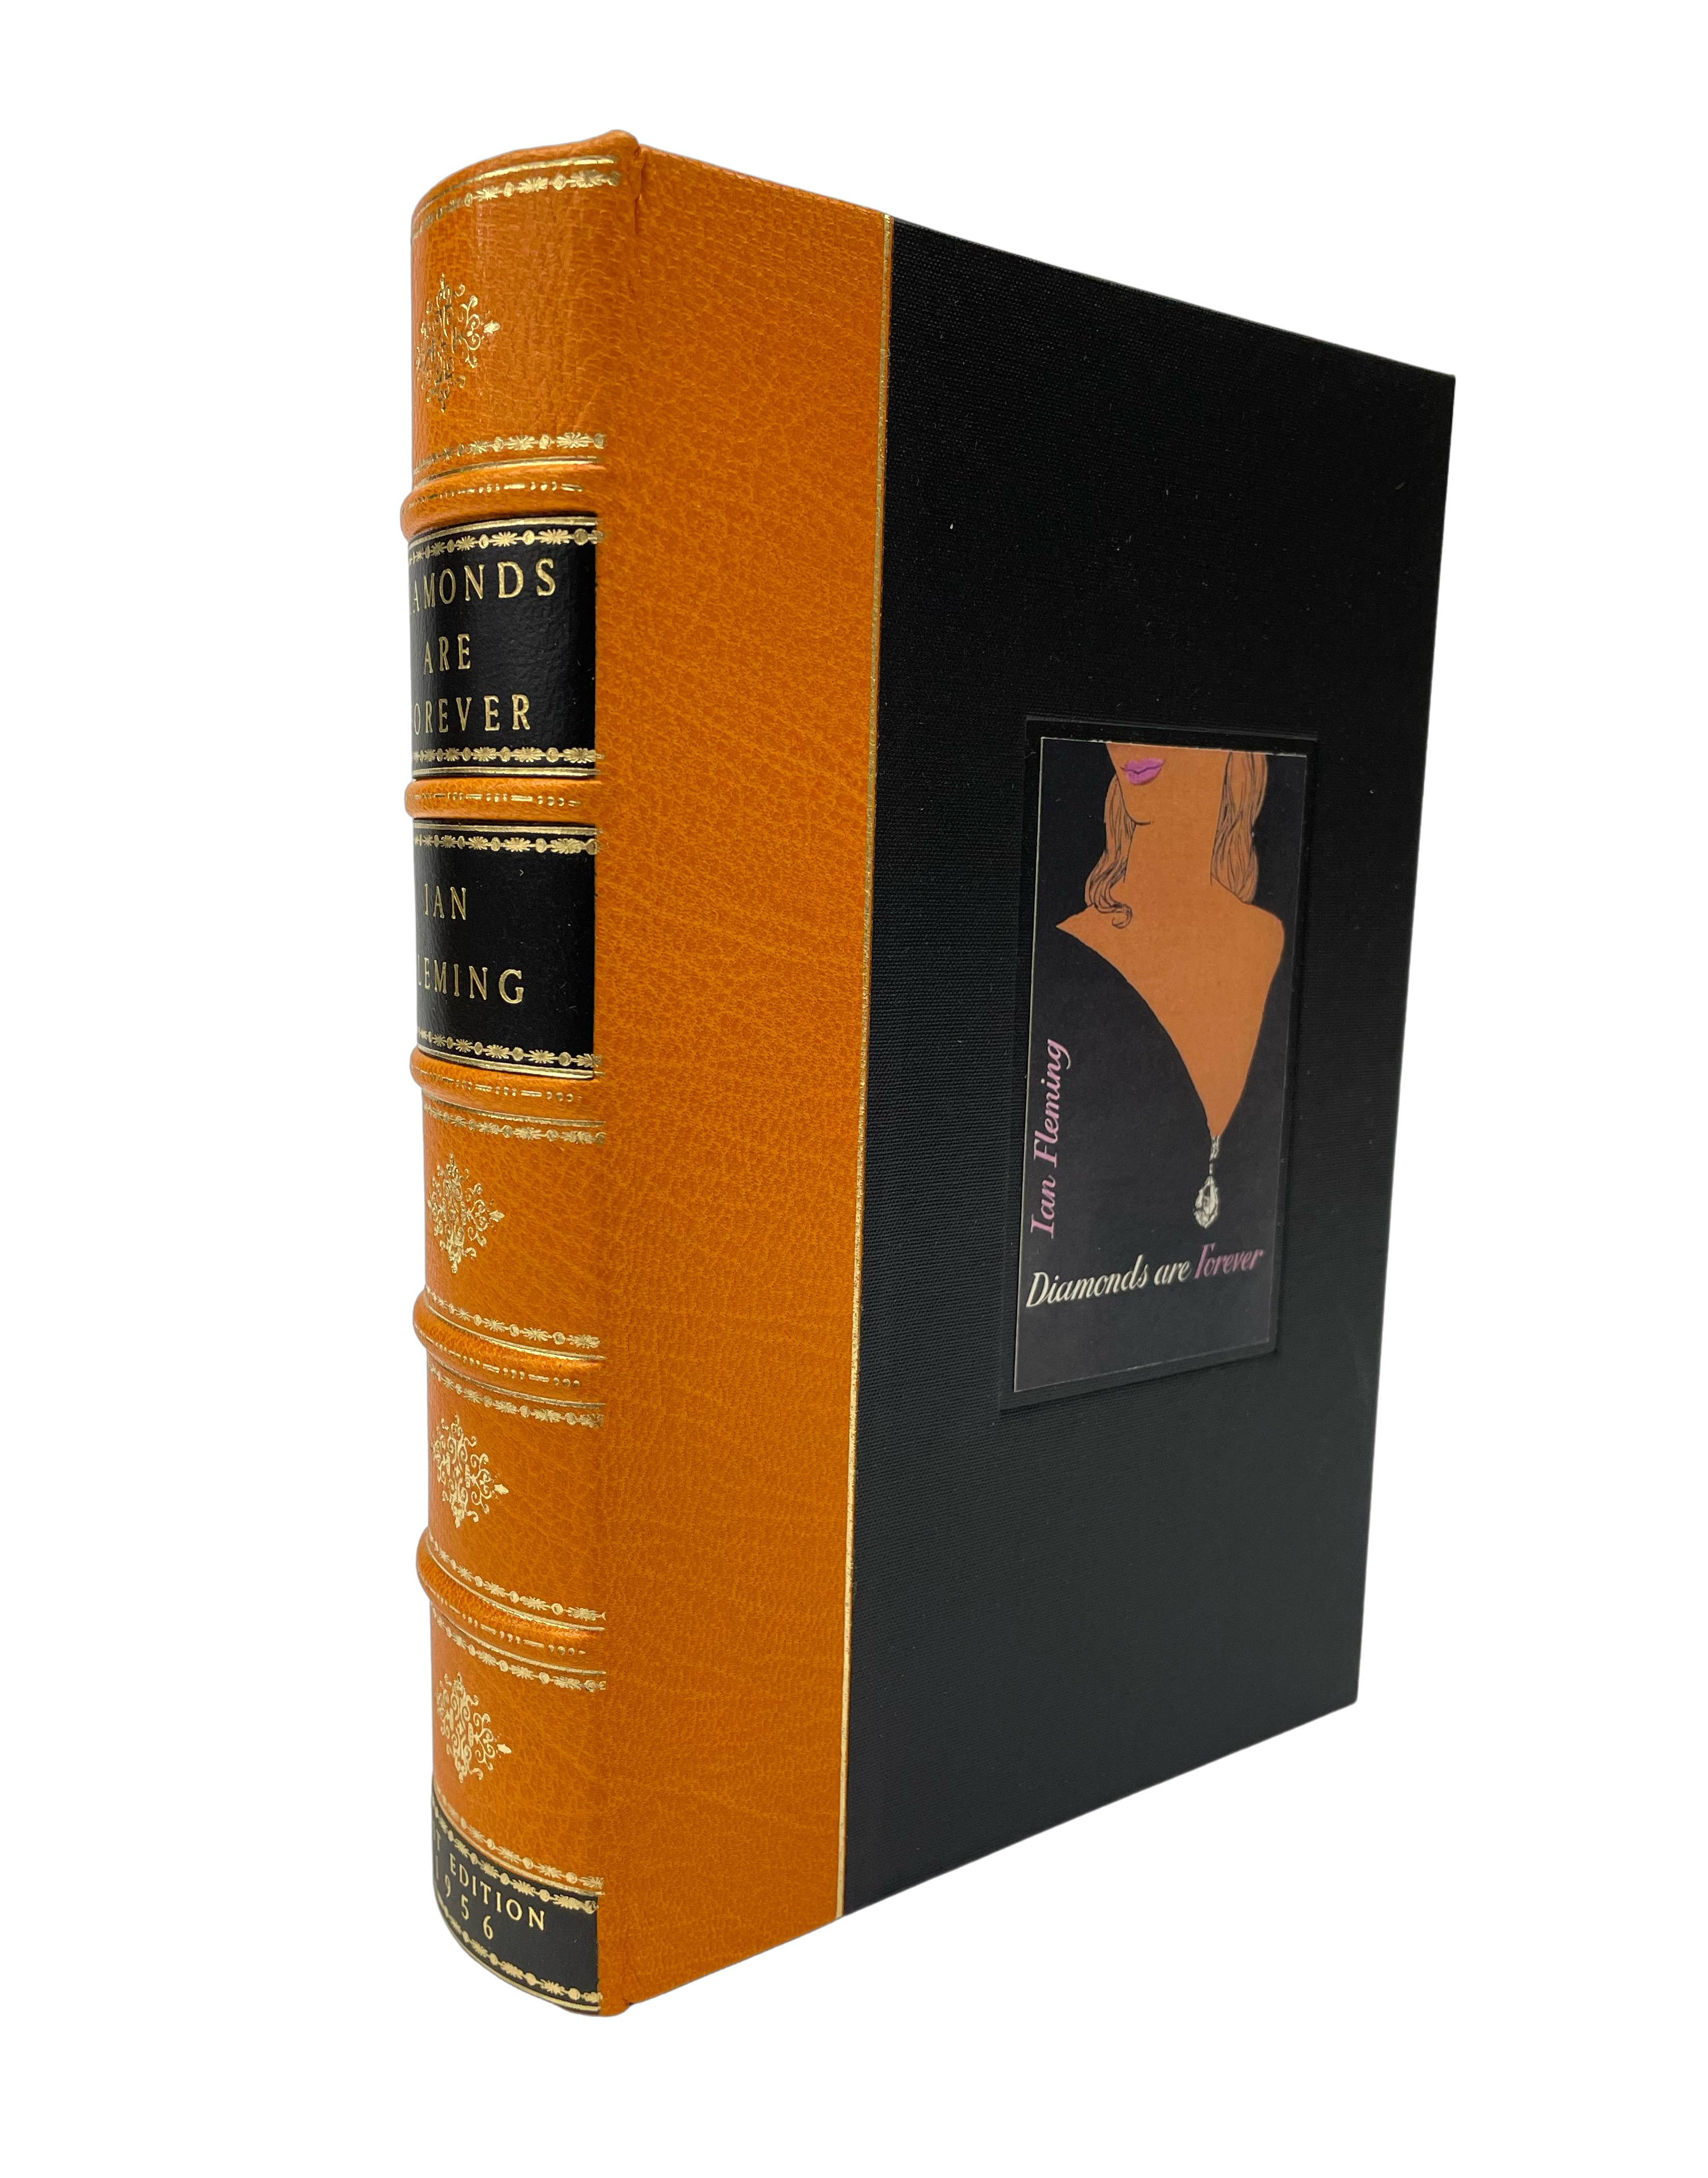 Fleming, Ian. Diamonds are Forever. London: Jonathan Cape, 1956. First edition, first printing. Octavo. Presented in the publisher's original boards and dust jacket. With a new archival quarter leather and cloth clamshell case.

This is the first